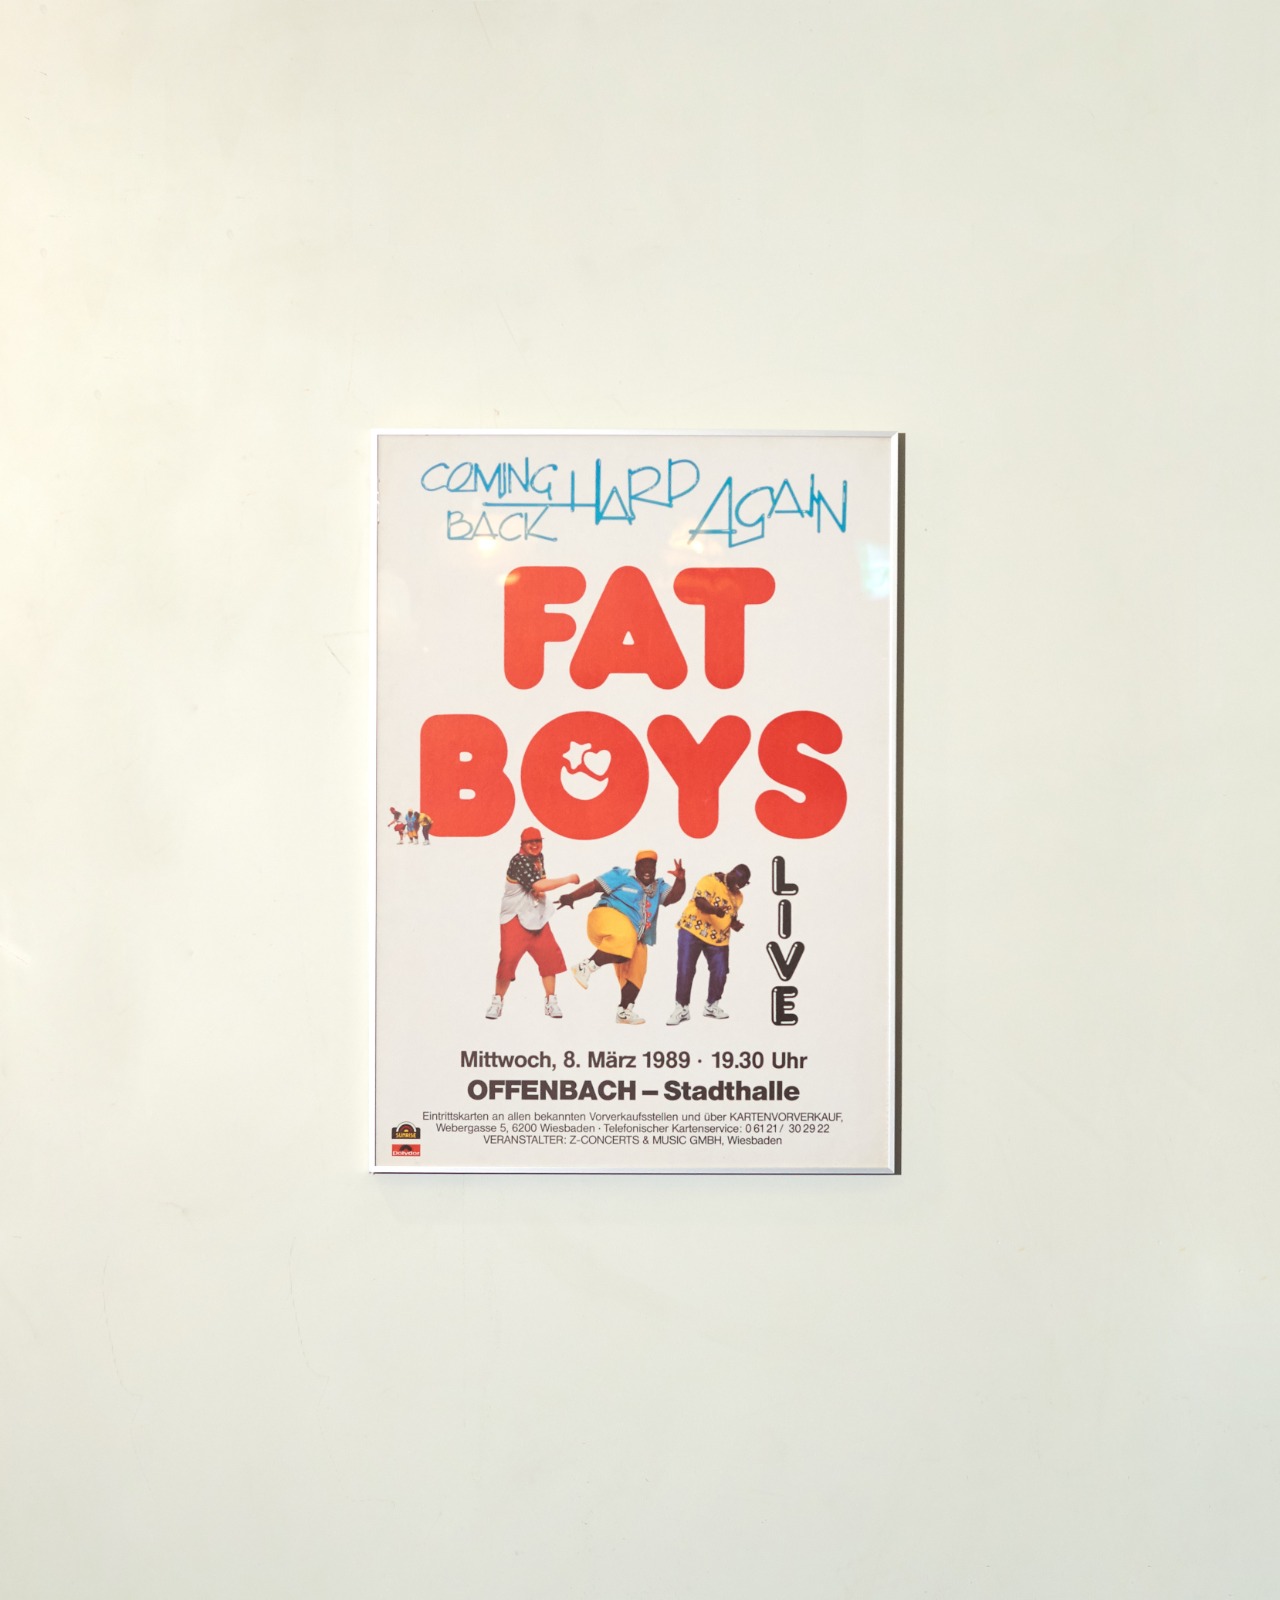 #10240 / FAT BOYS 1989 - Coming Back Hard Again - Tour Poster